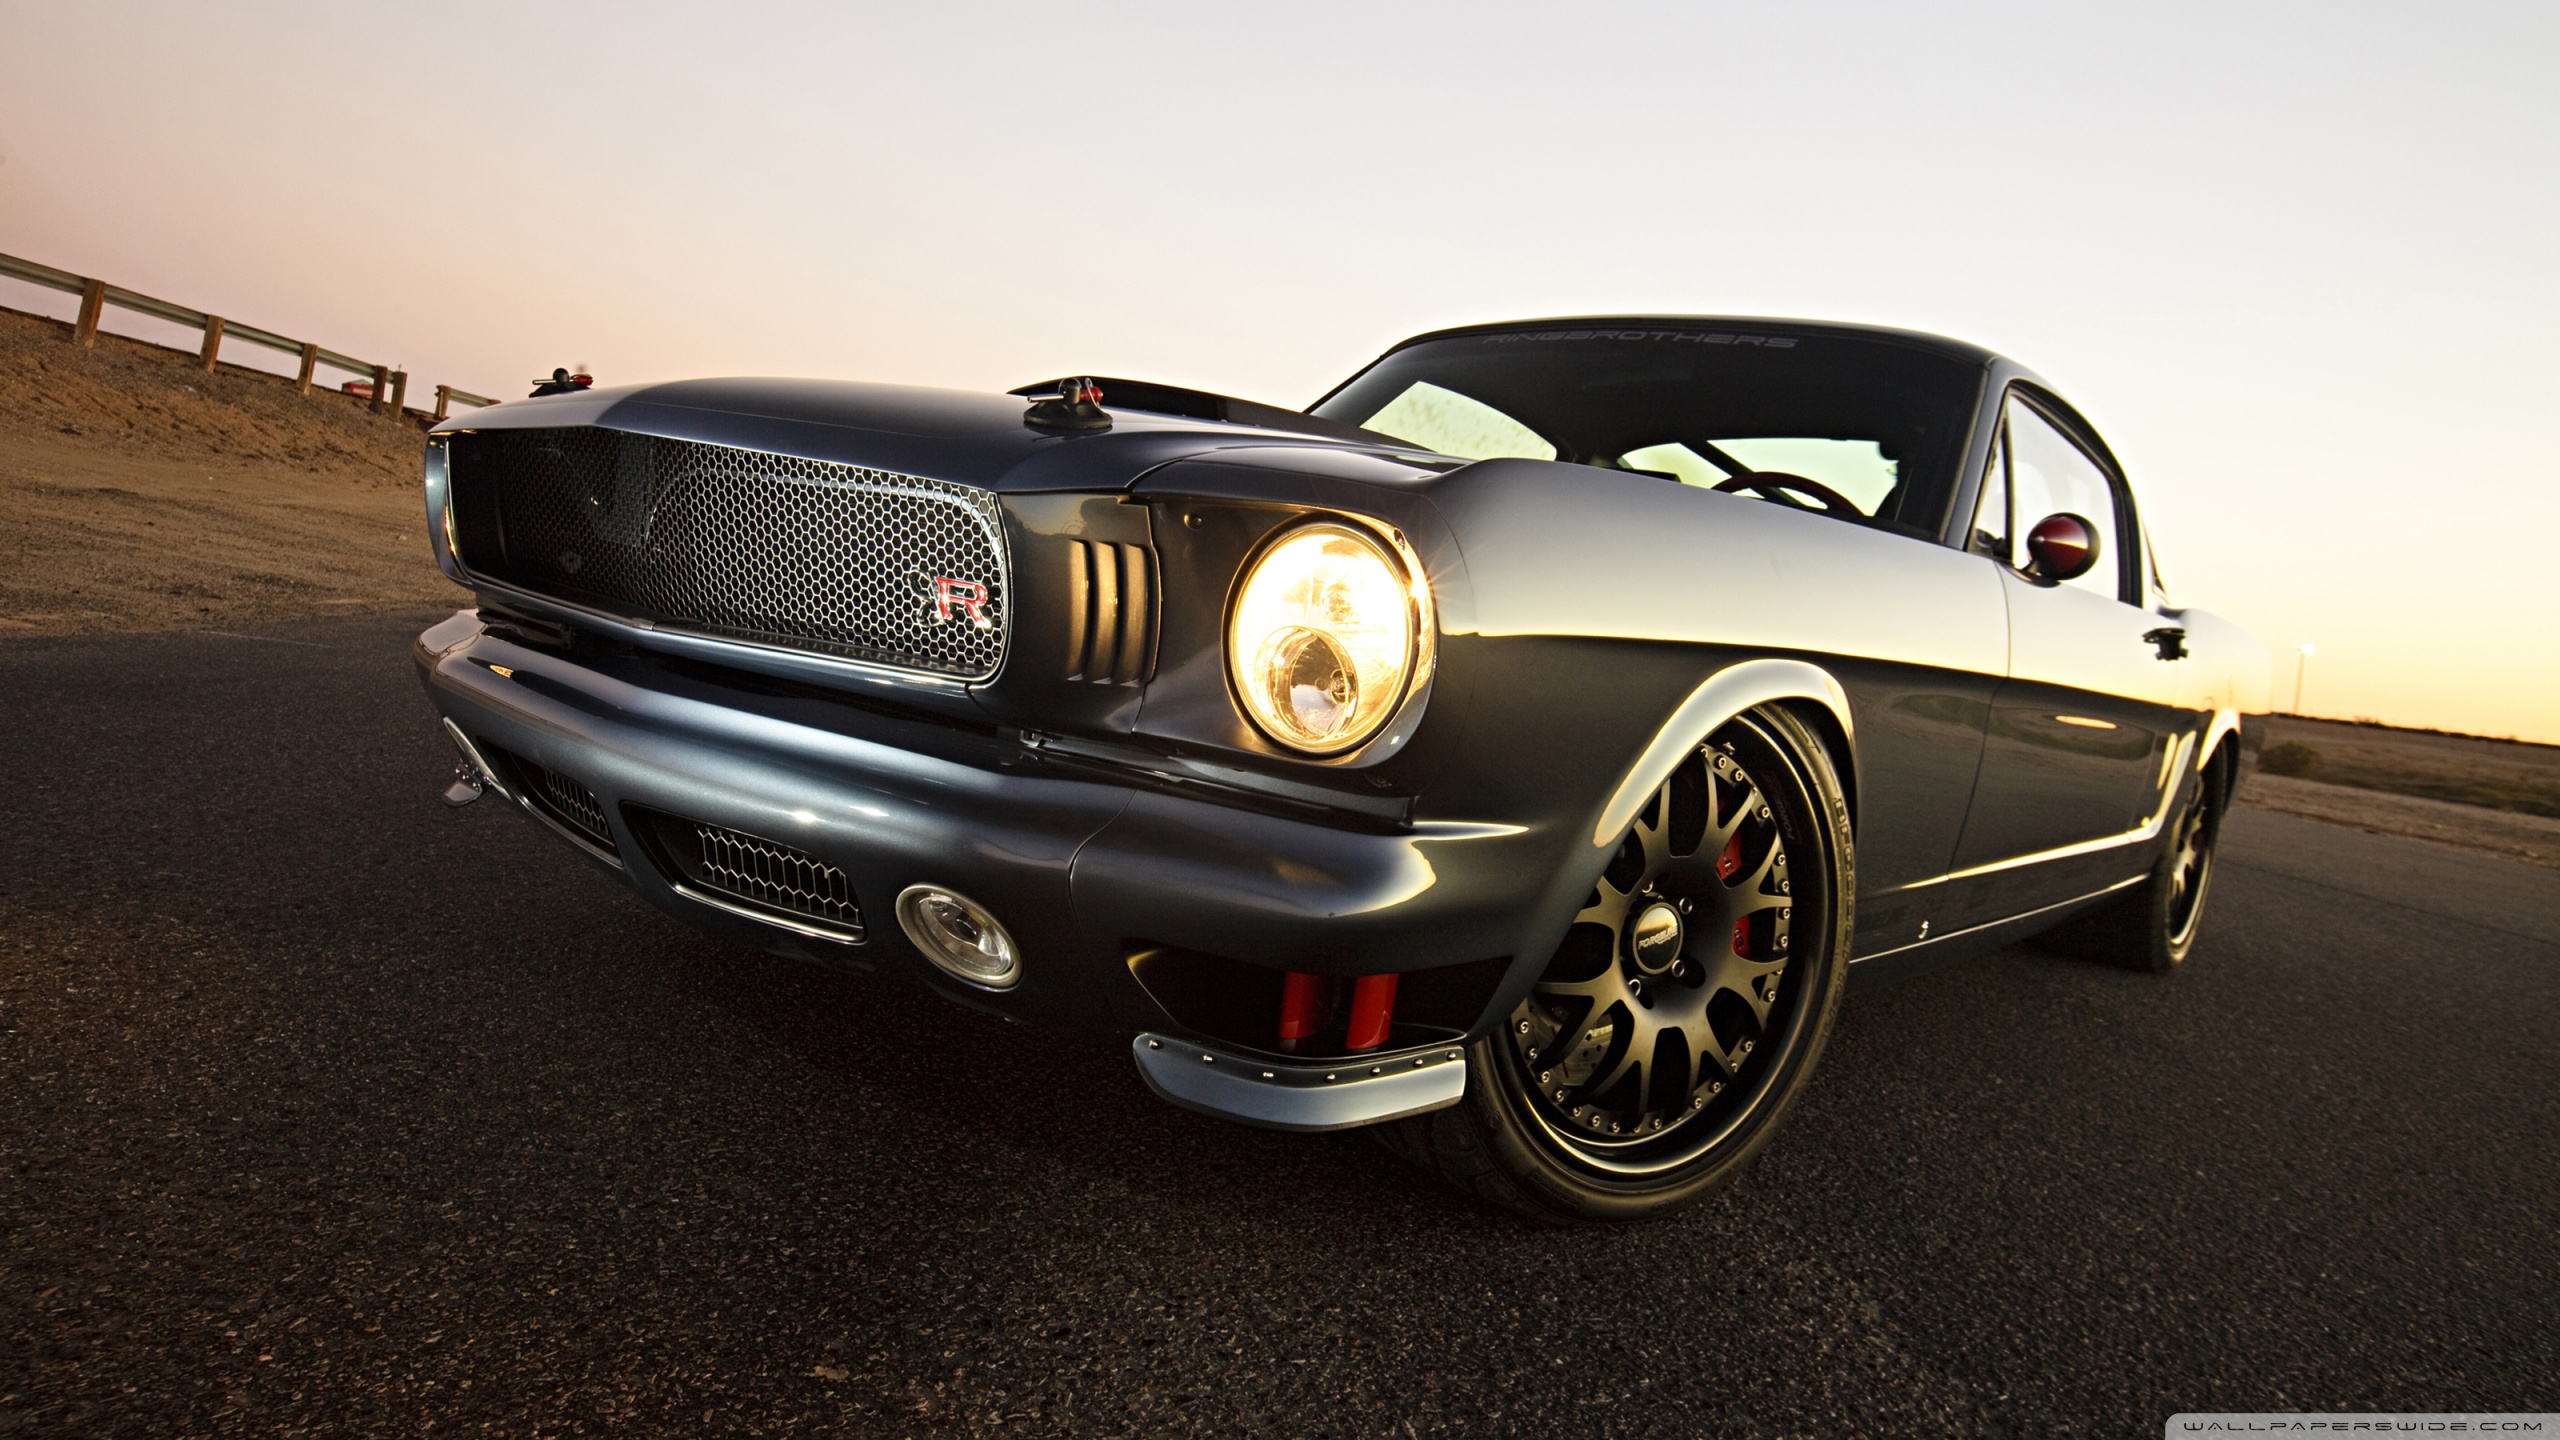 Hd Wallpaper Ford Ford Mustang Widebody Ford Mustang Widebody Wallpaper Flare